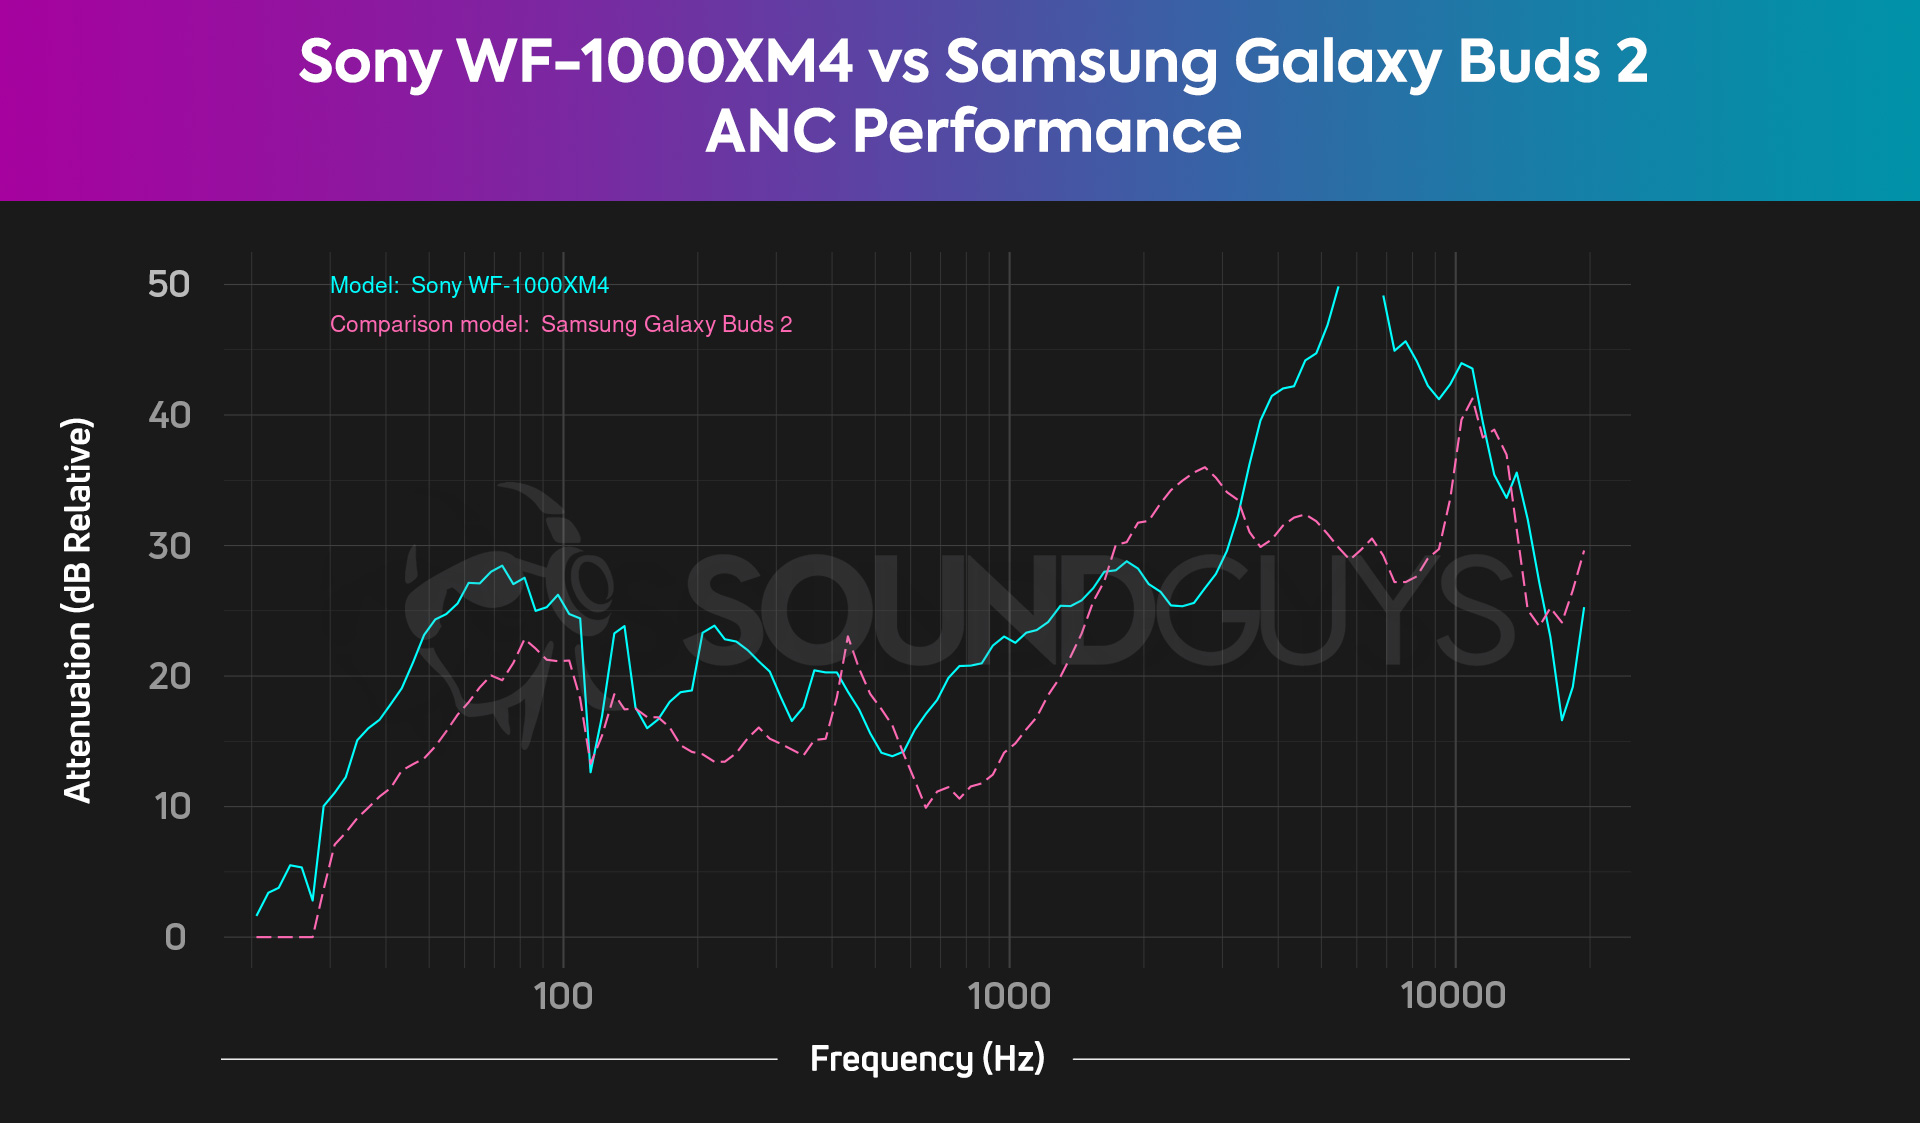 Sony WF 1000XM4 vs Samsung Galaxy Buds 2 noise cancelling attenuation comparison chart